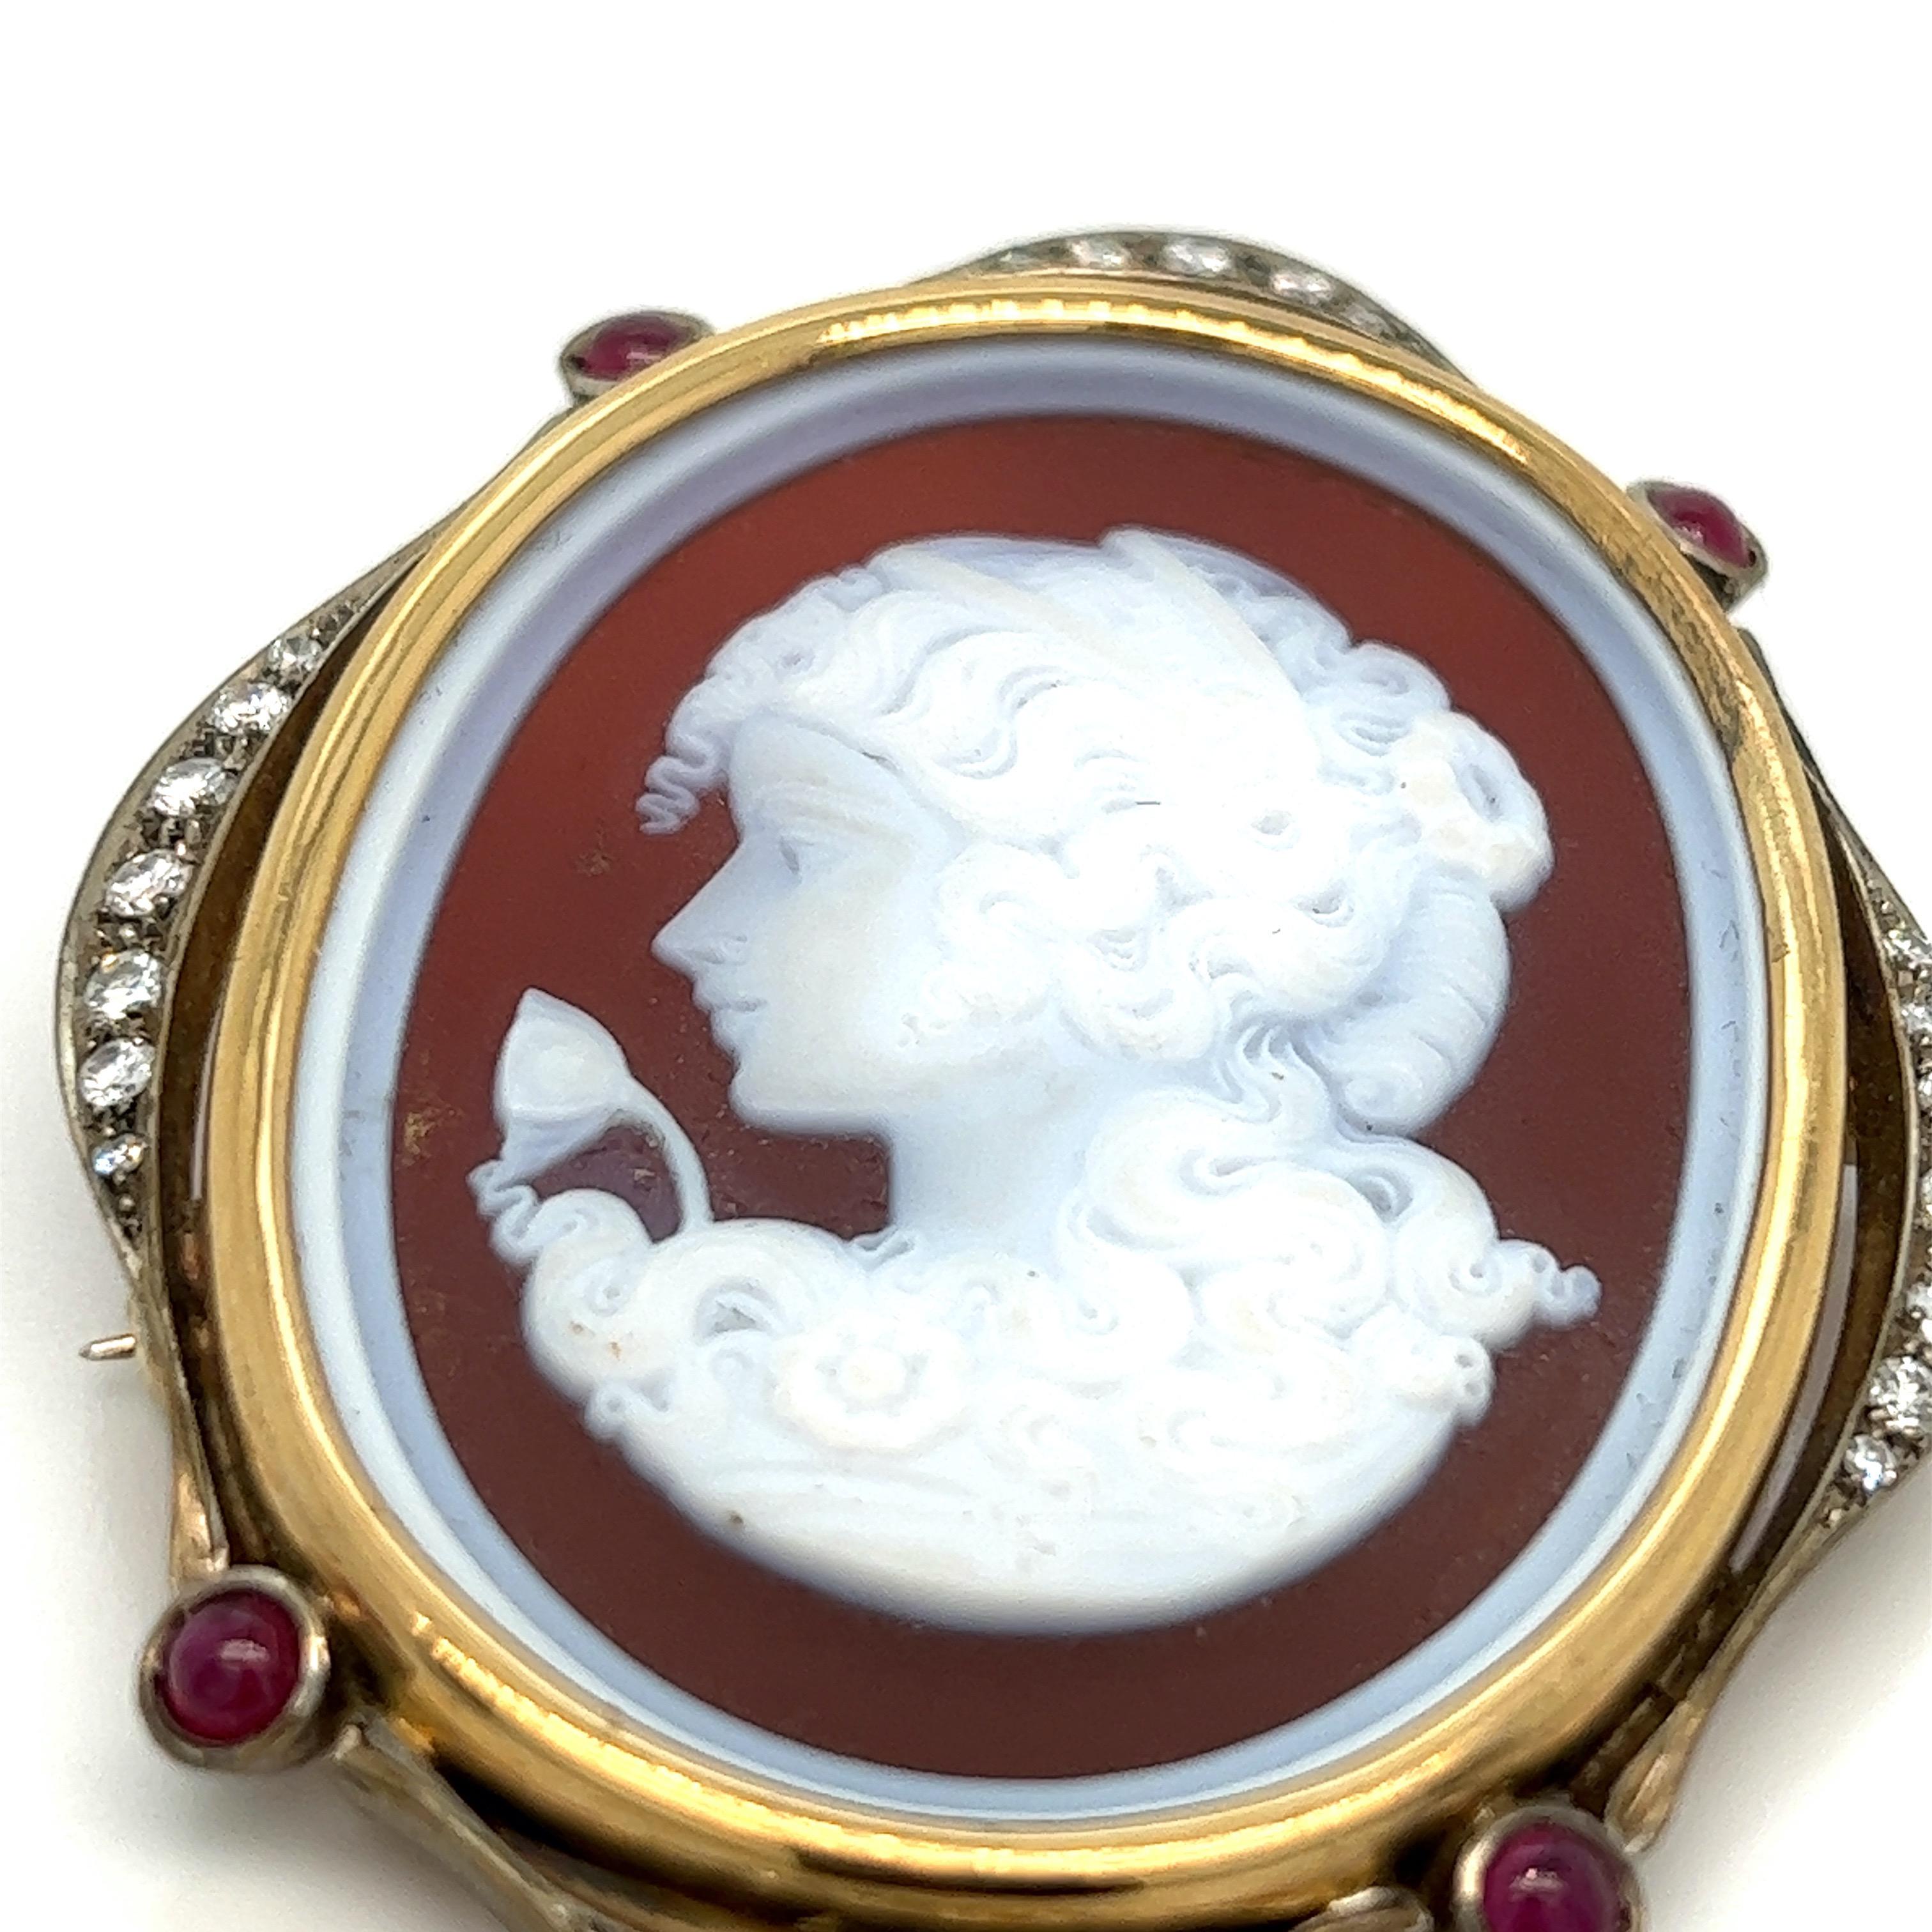 Silver and gold diamond ruby shell cameo, featuring a side profile of a Victorian lady

18 karat yellow gold, round-cut diamond of approximately 0.70 carat, cabochon rubies of approximately 0.64 carat

Size: width 1.88 inches, length 2.38